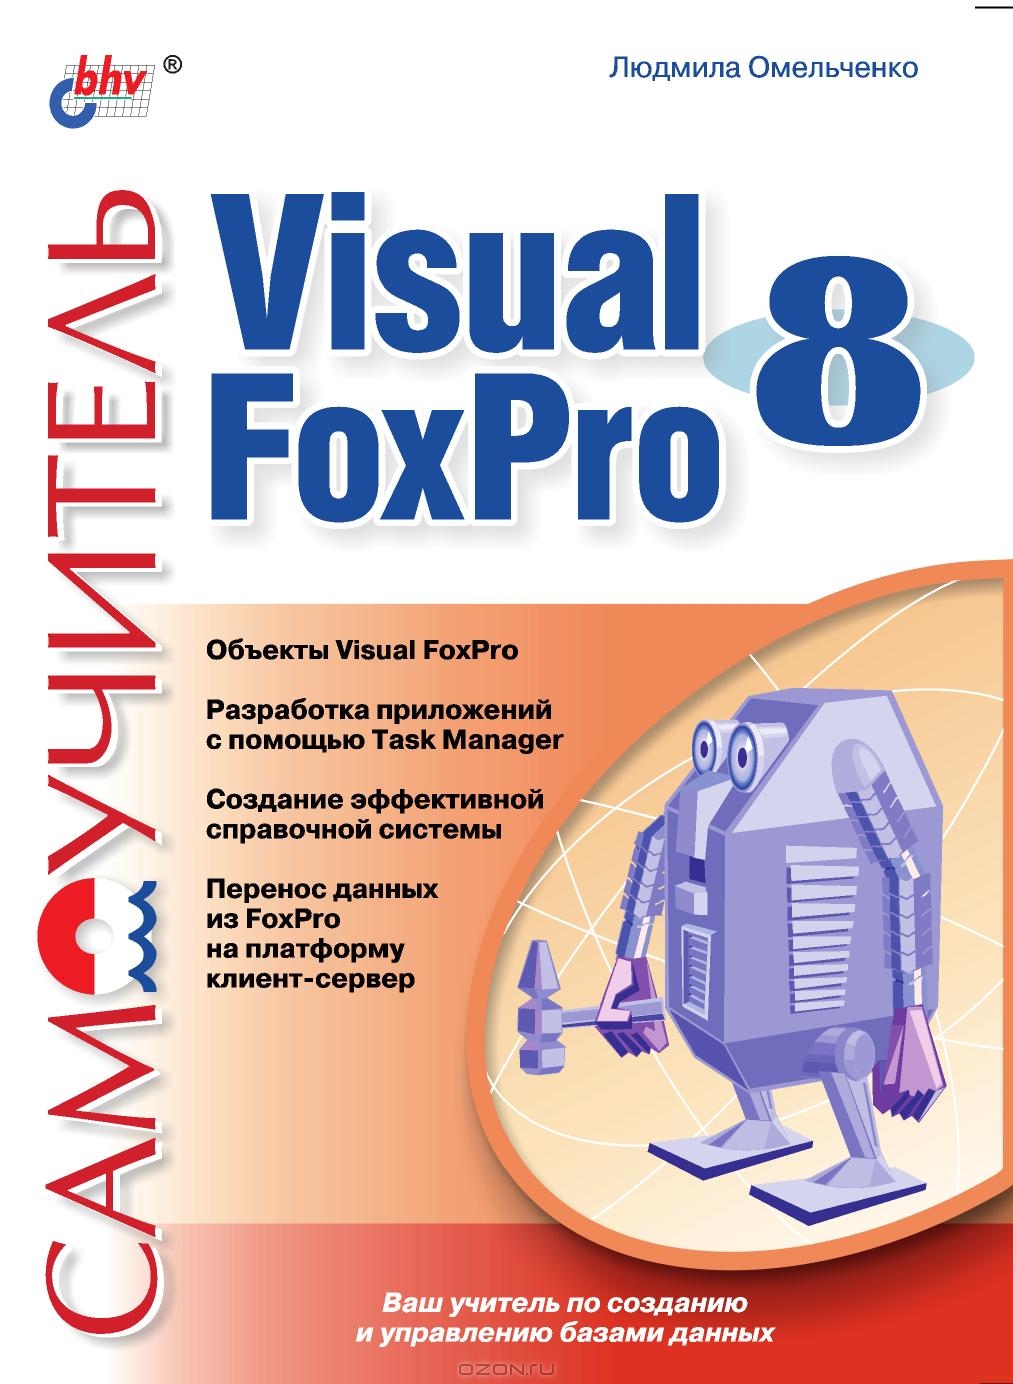 visual foxpro copy to command